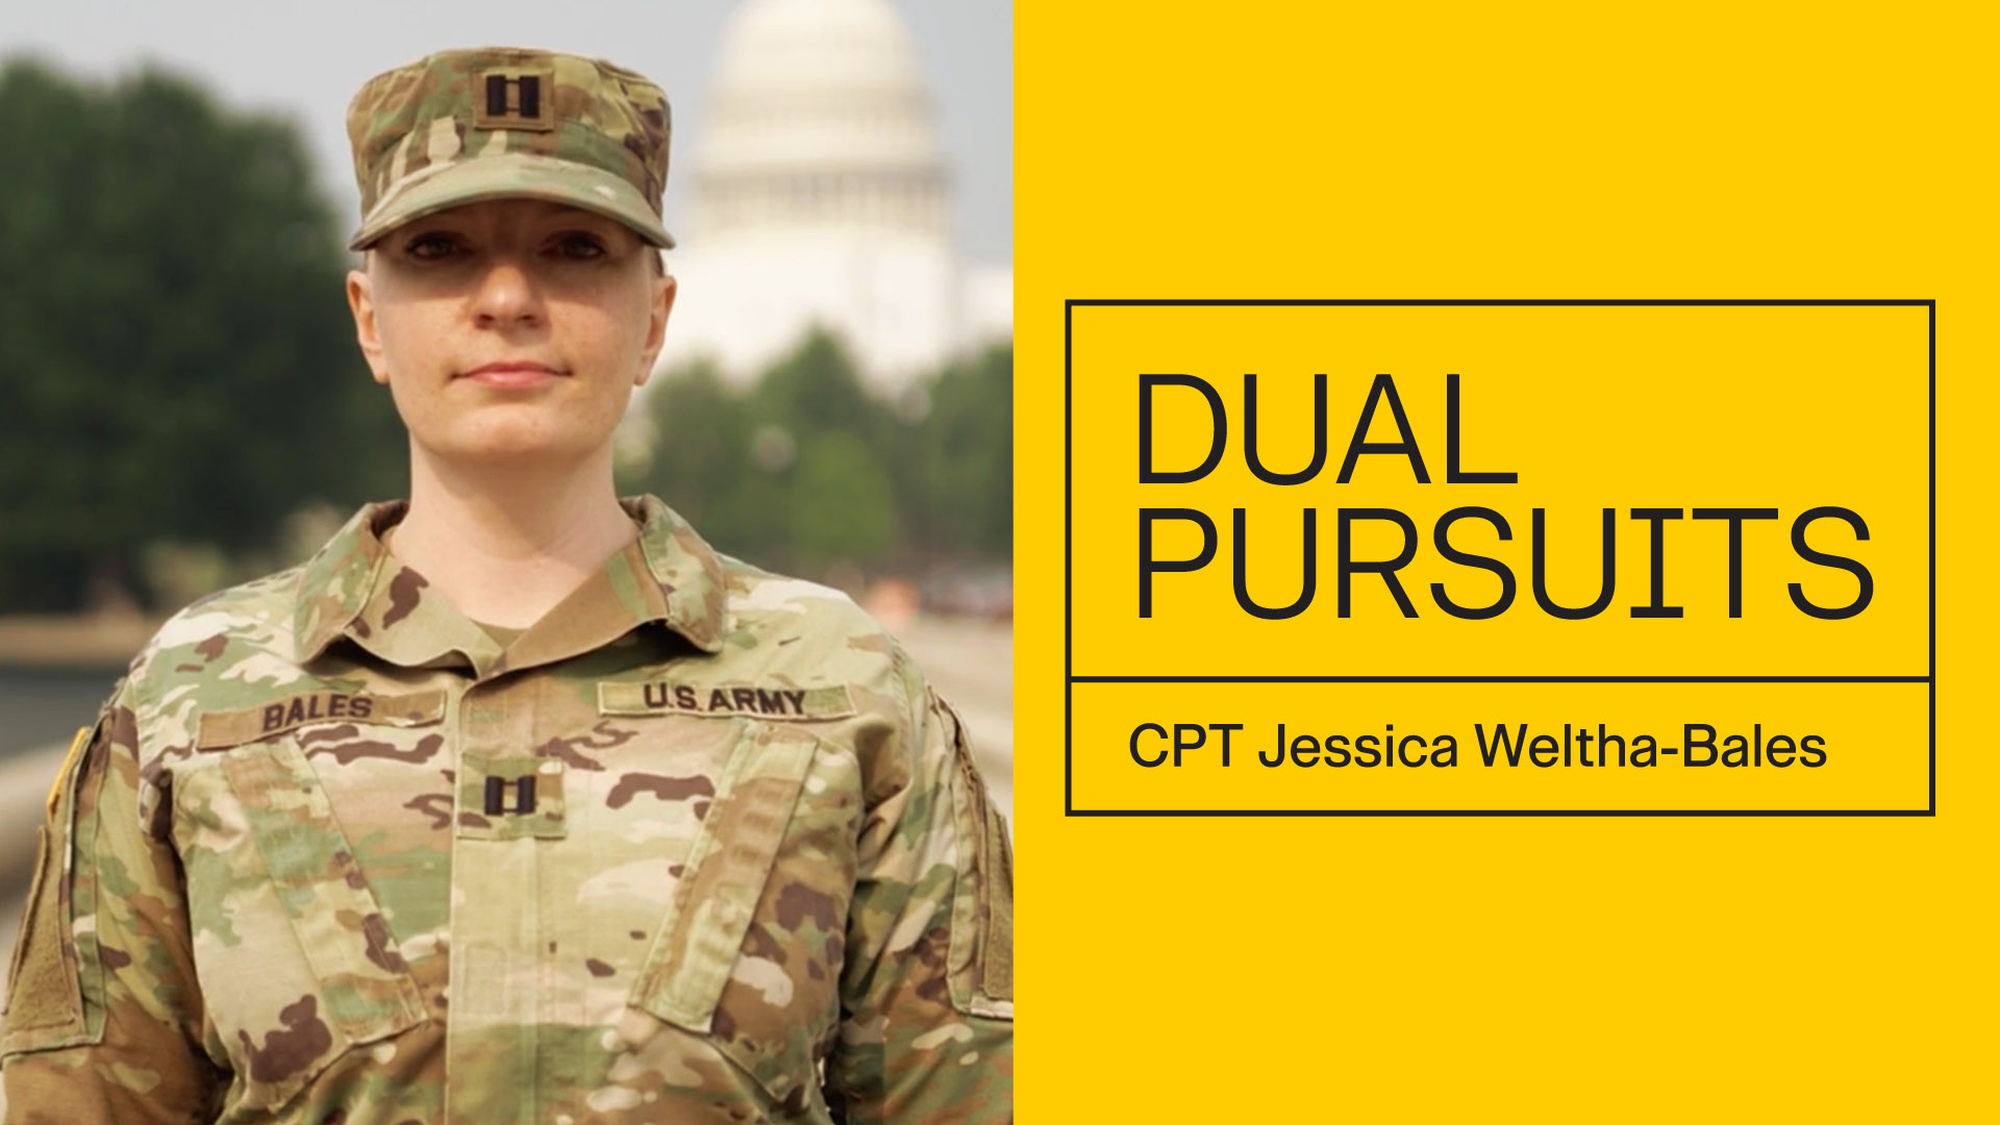 Army Reserve CPT Jessica Weltha-Bales shares how she's pursuing her passions and being all she can be in through serving part time.